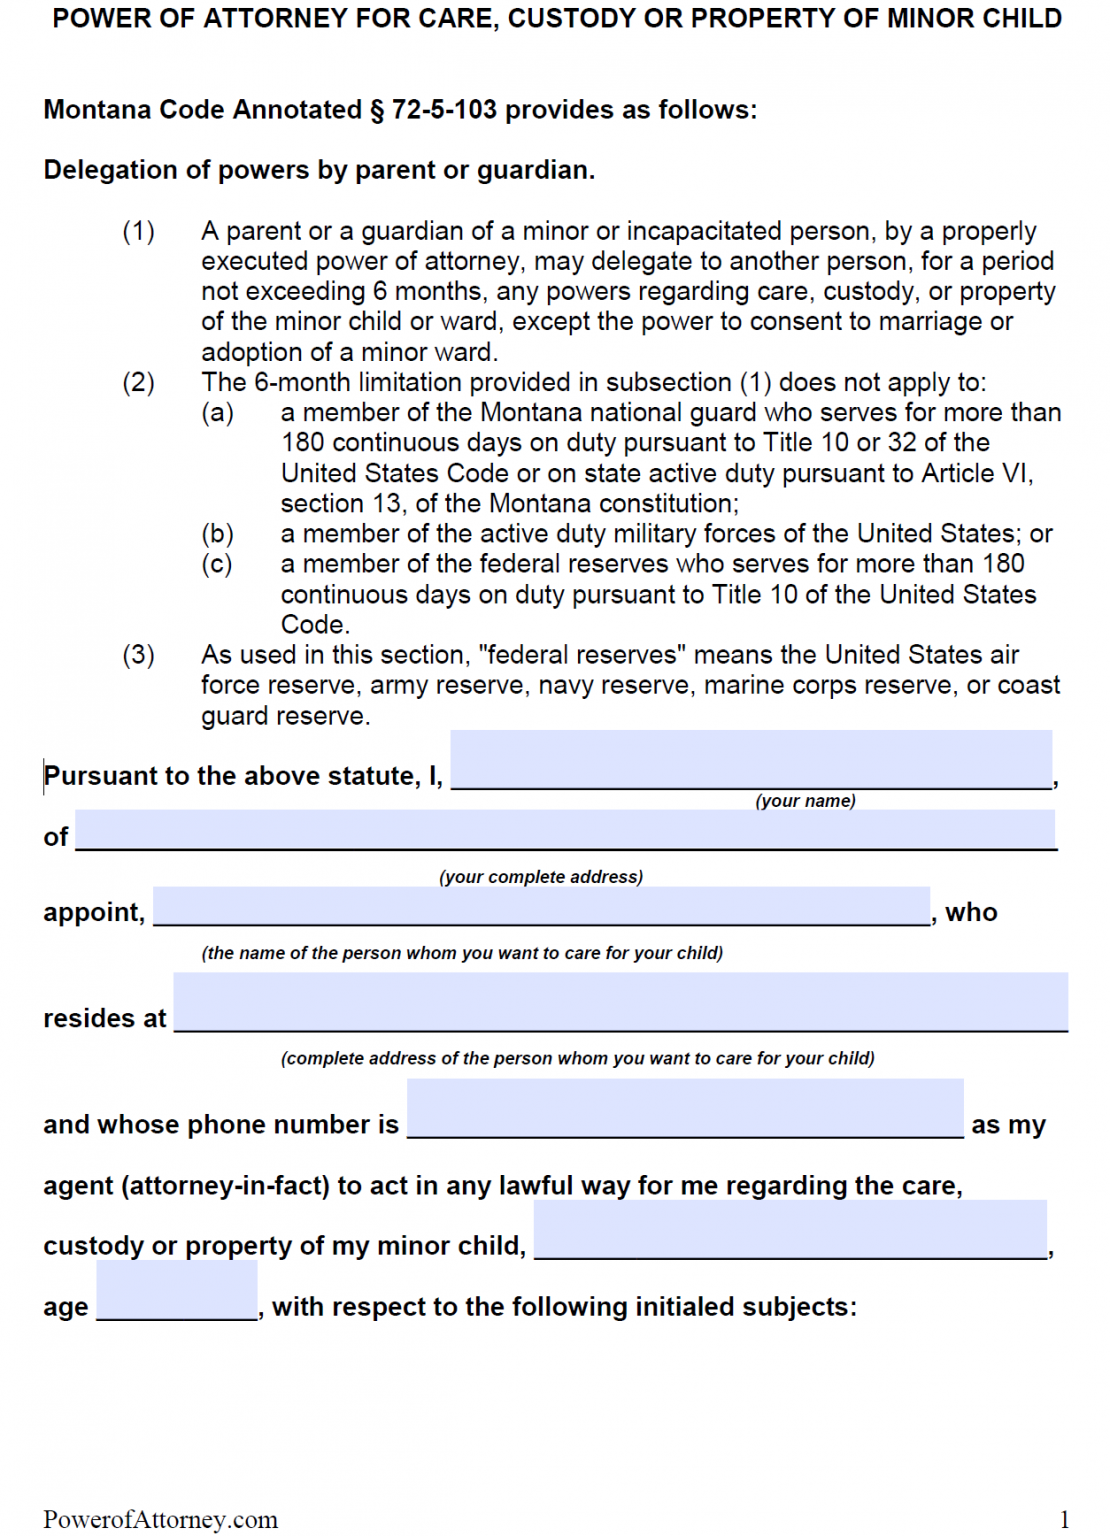 durable-power-of-attorney-form-montana-form-resume-examples-wrypp1dy4a